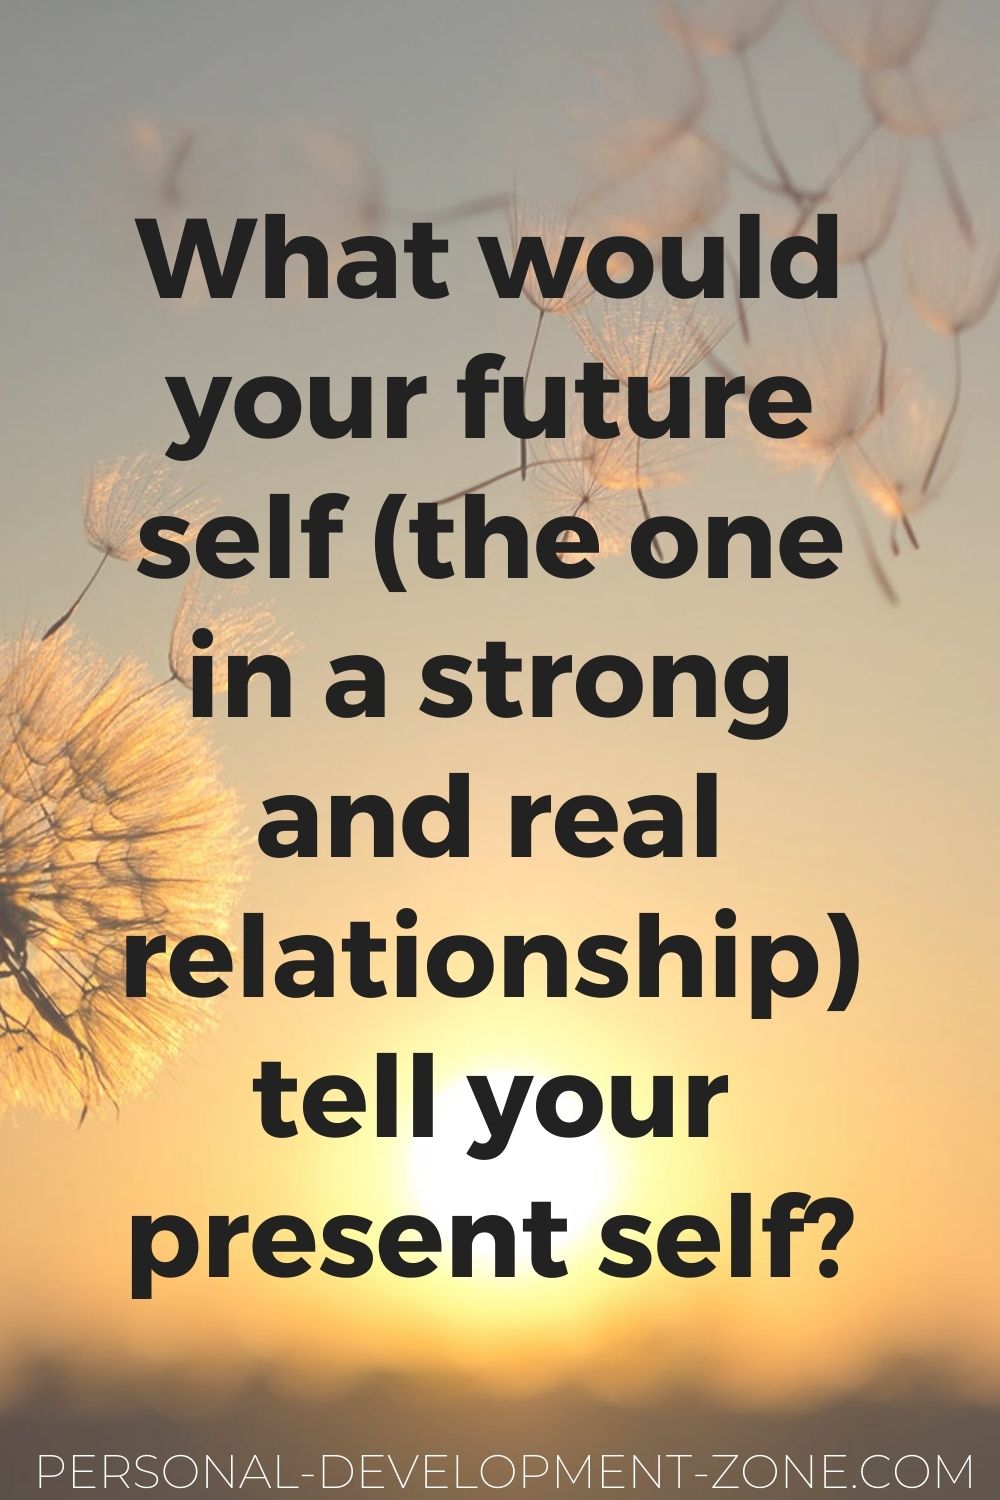 dating quotes what would your future self tell your present self